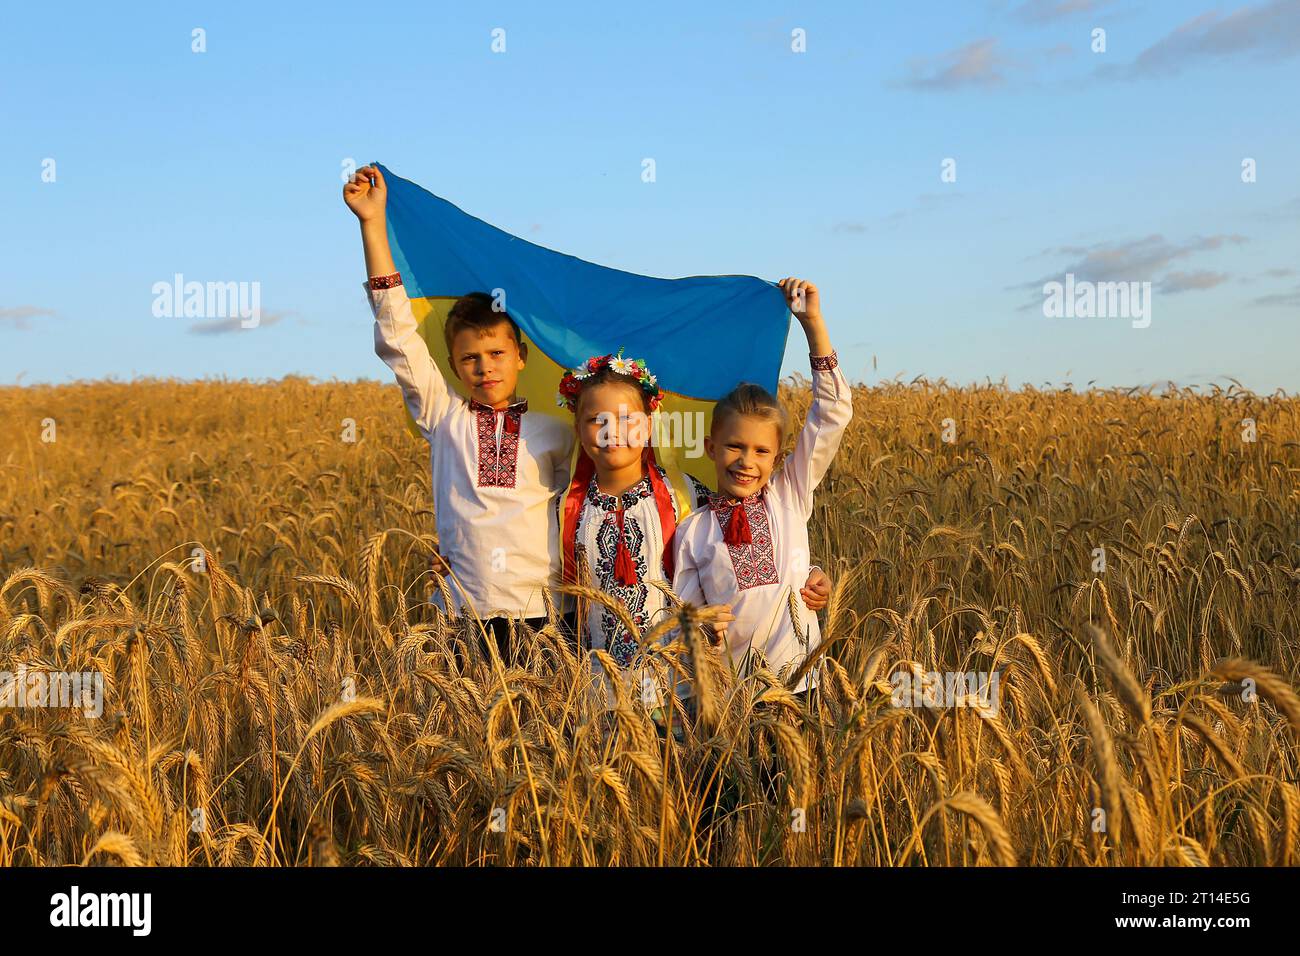 Happy smiling Ukrainian children carries fluttering blue and yellow flag of Ukraine against blue sky and wheat field background. Celebrate Constitutio Stock Photo